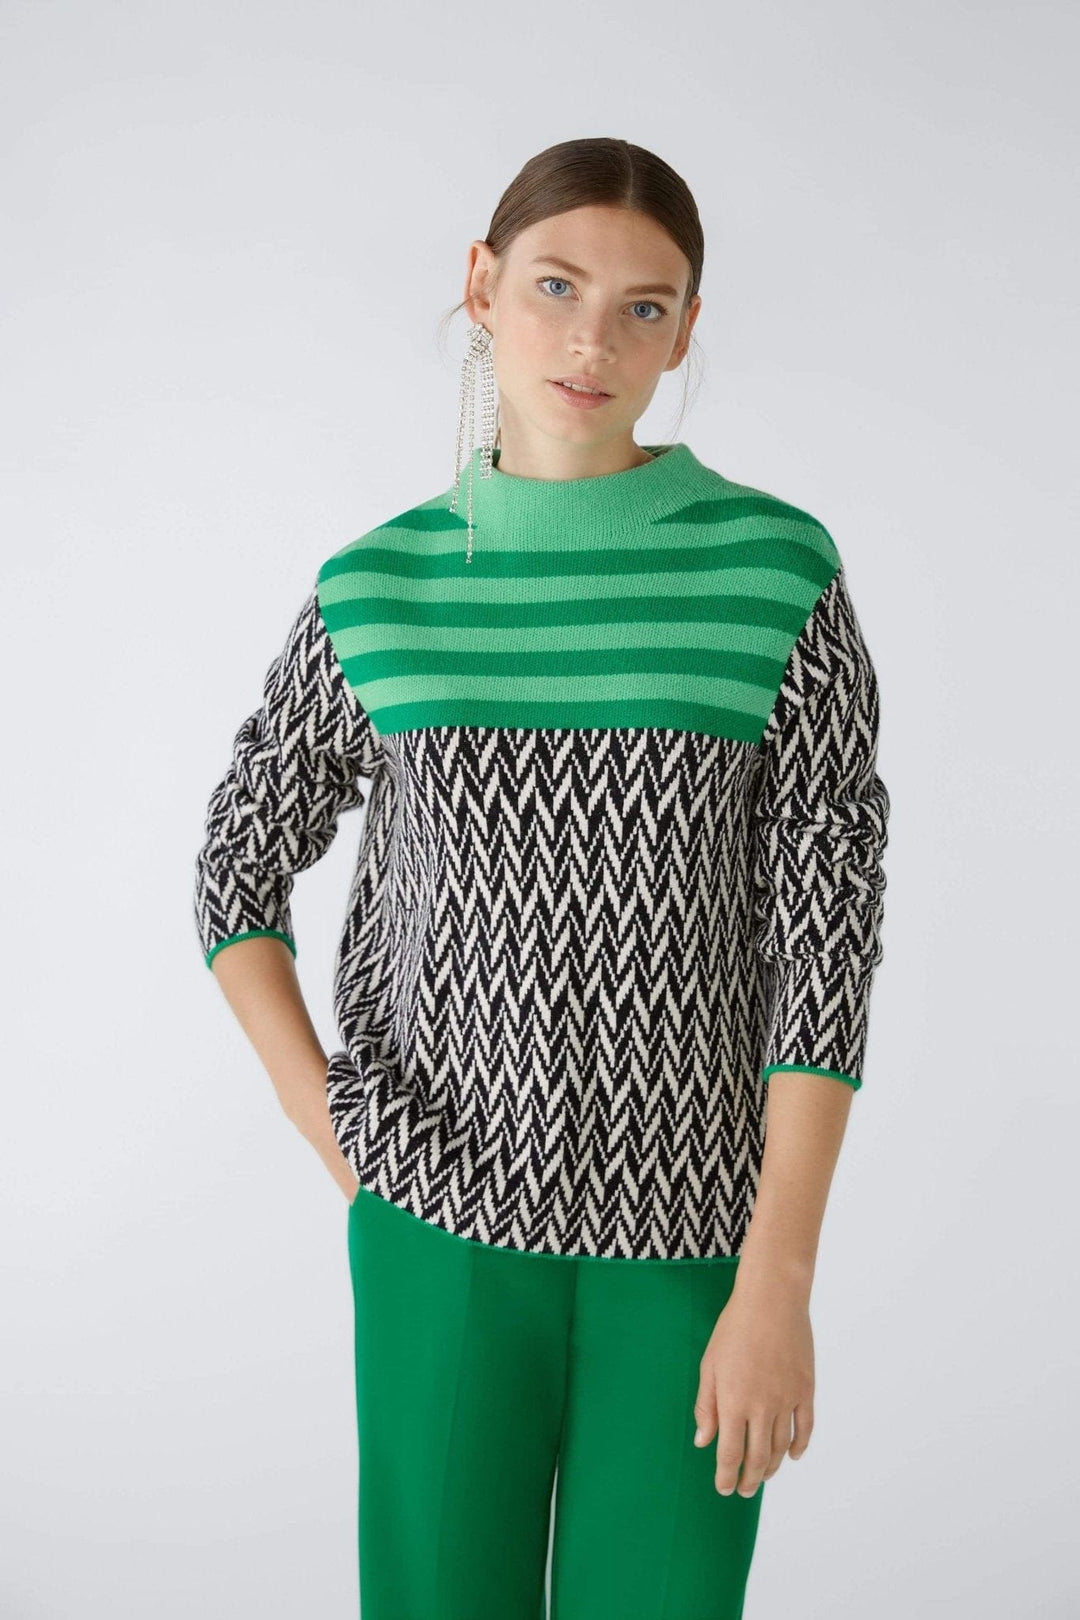 Oui patterned Knitted Jumper In Green & Black - Crabtree Cottage